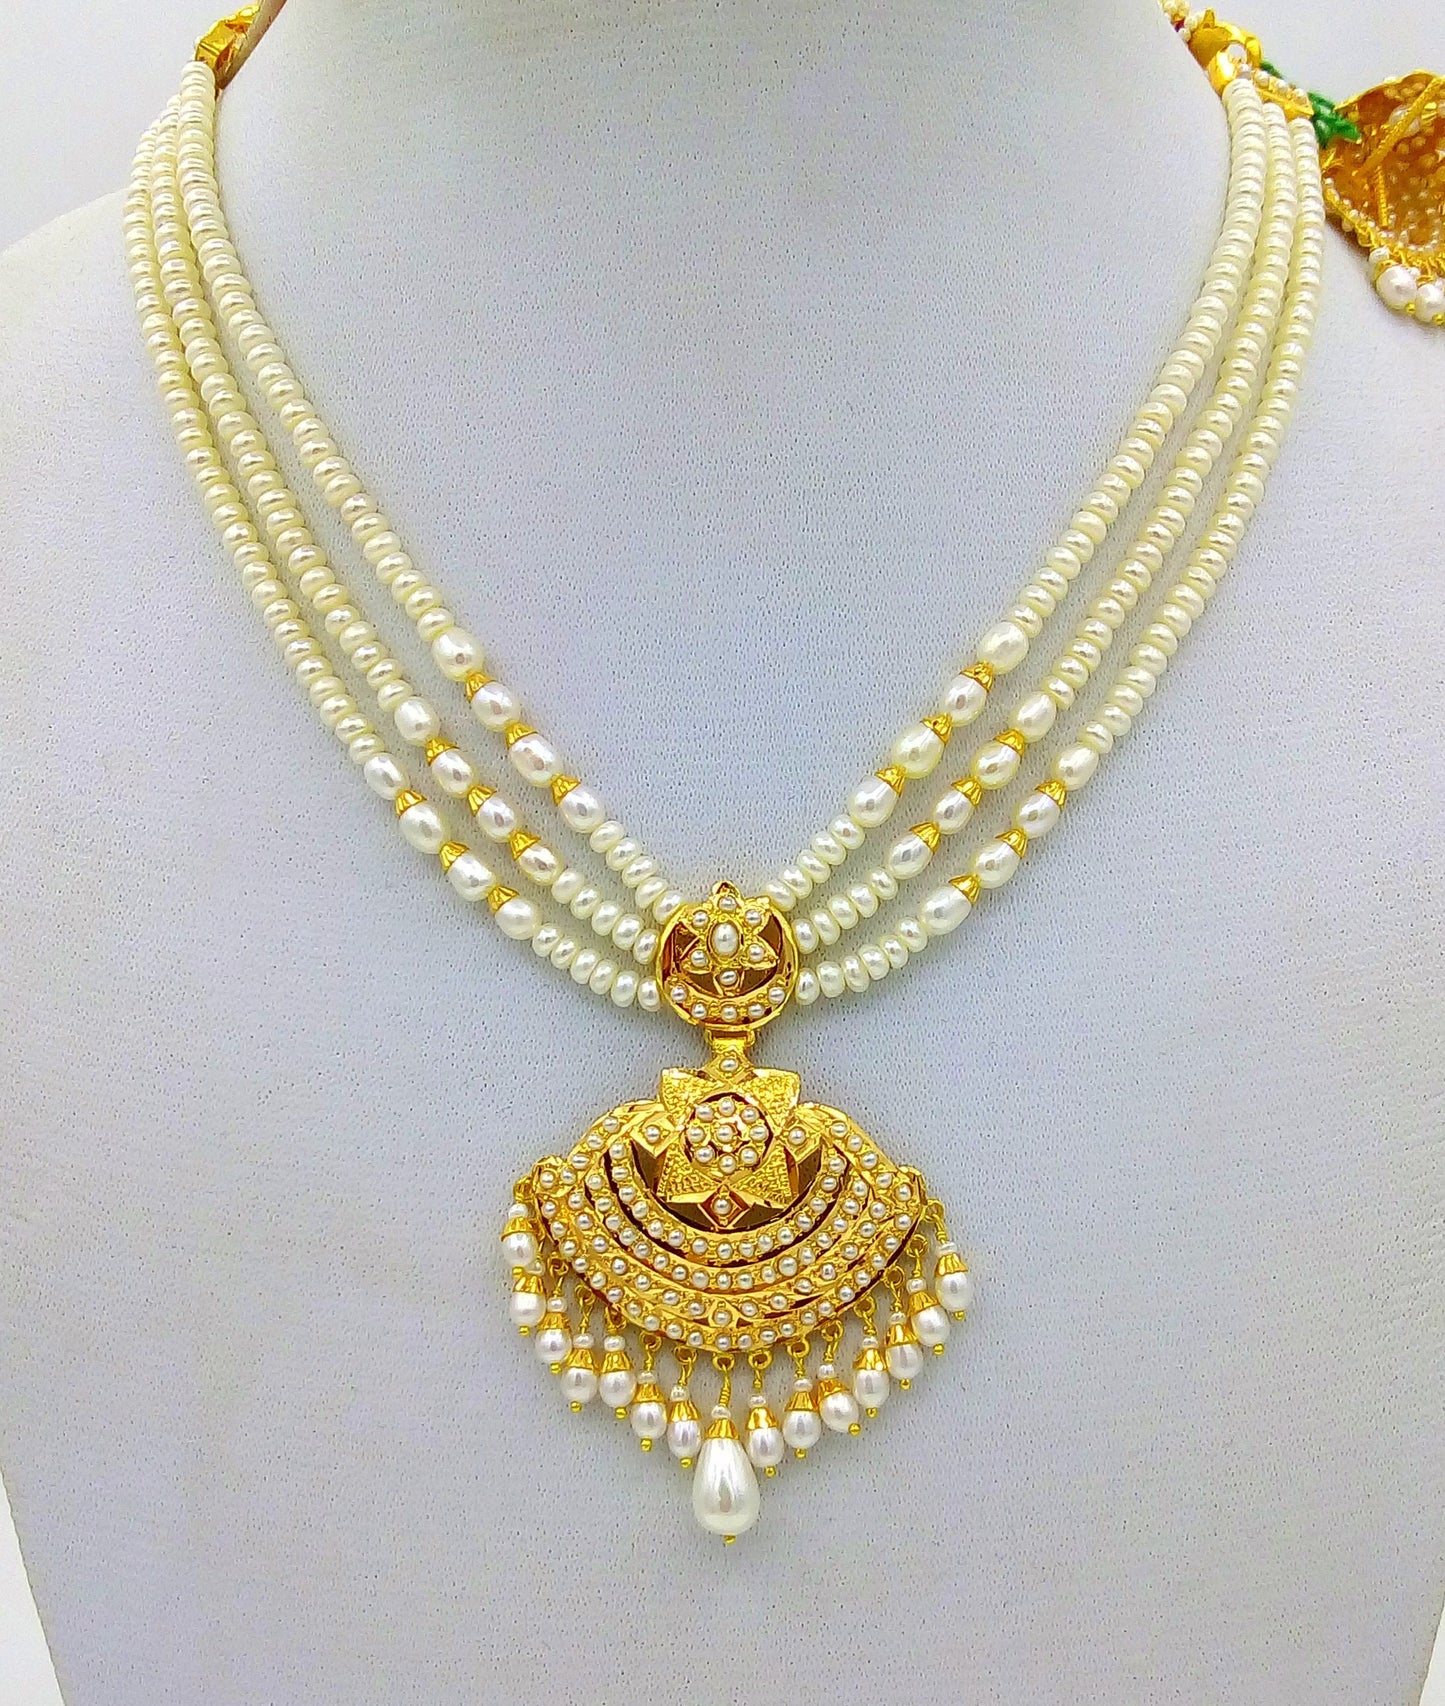 222kt yellow gold handmade gorgeous pearl necklace excellent wedding bridal necklace unisex tribal punjabi muslim jewelry set08 - TRIBAL ORNAMENTS